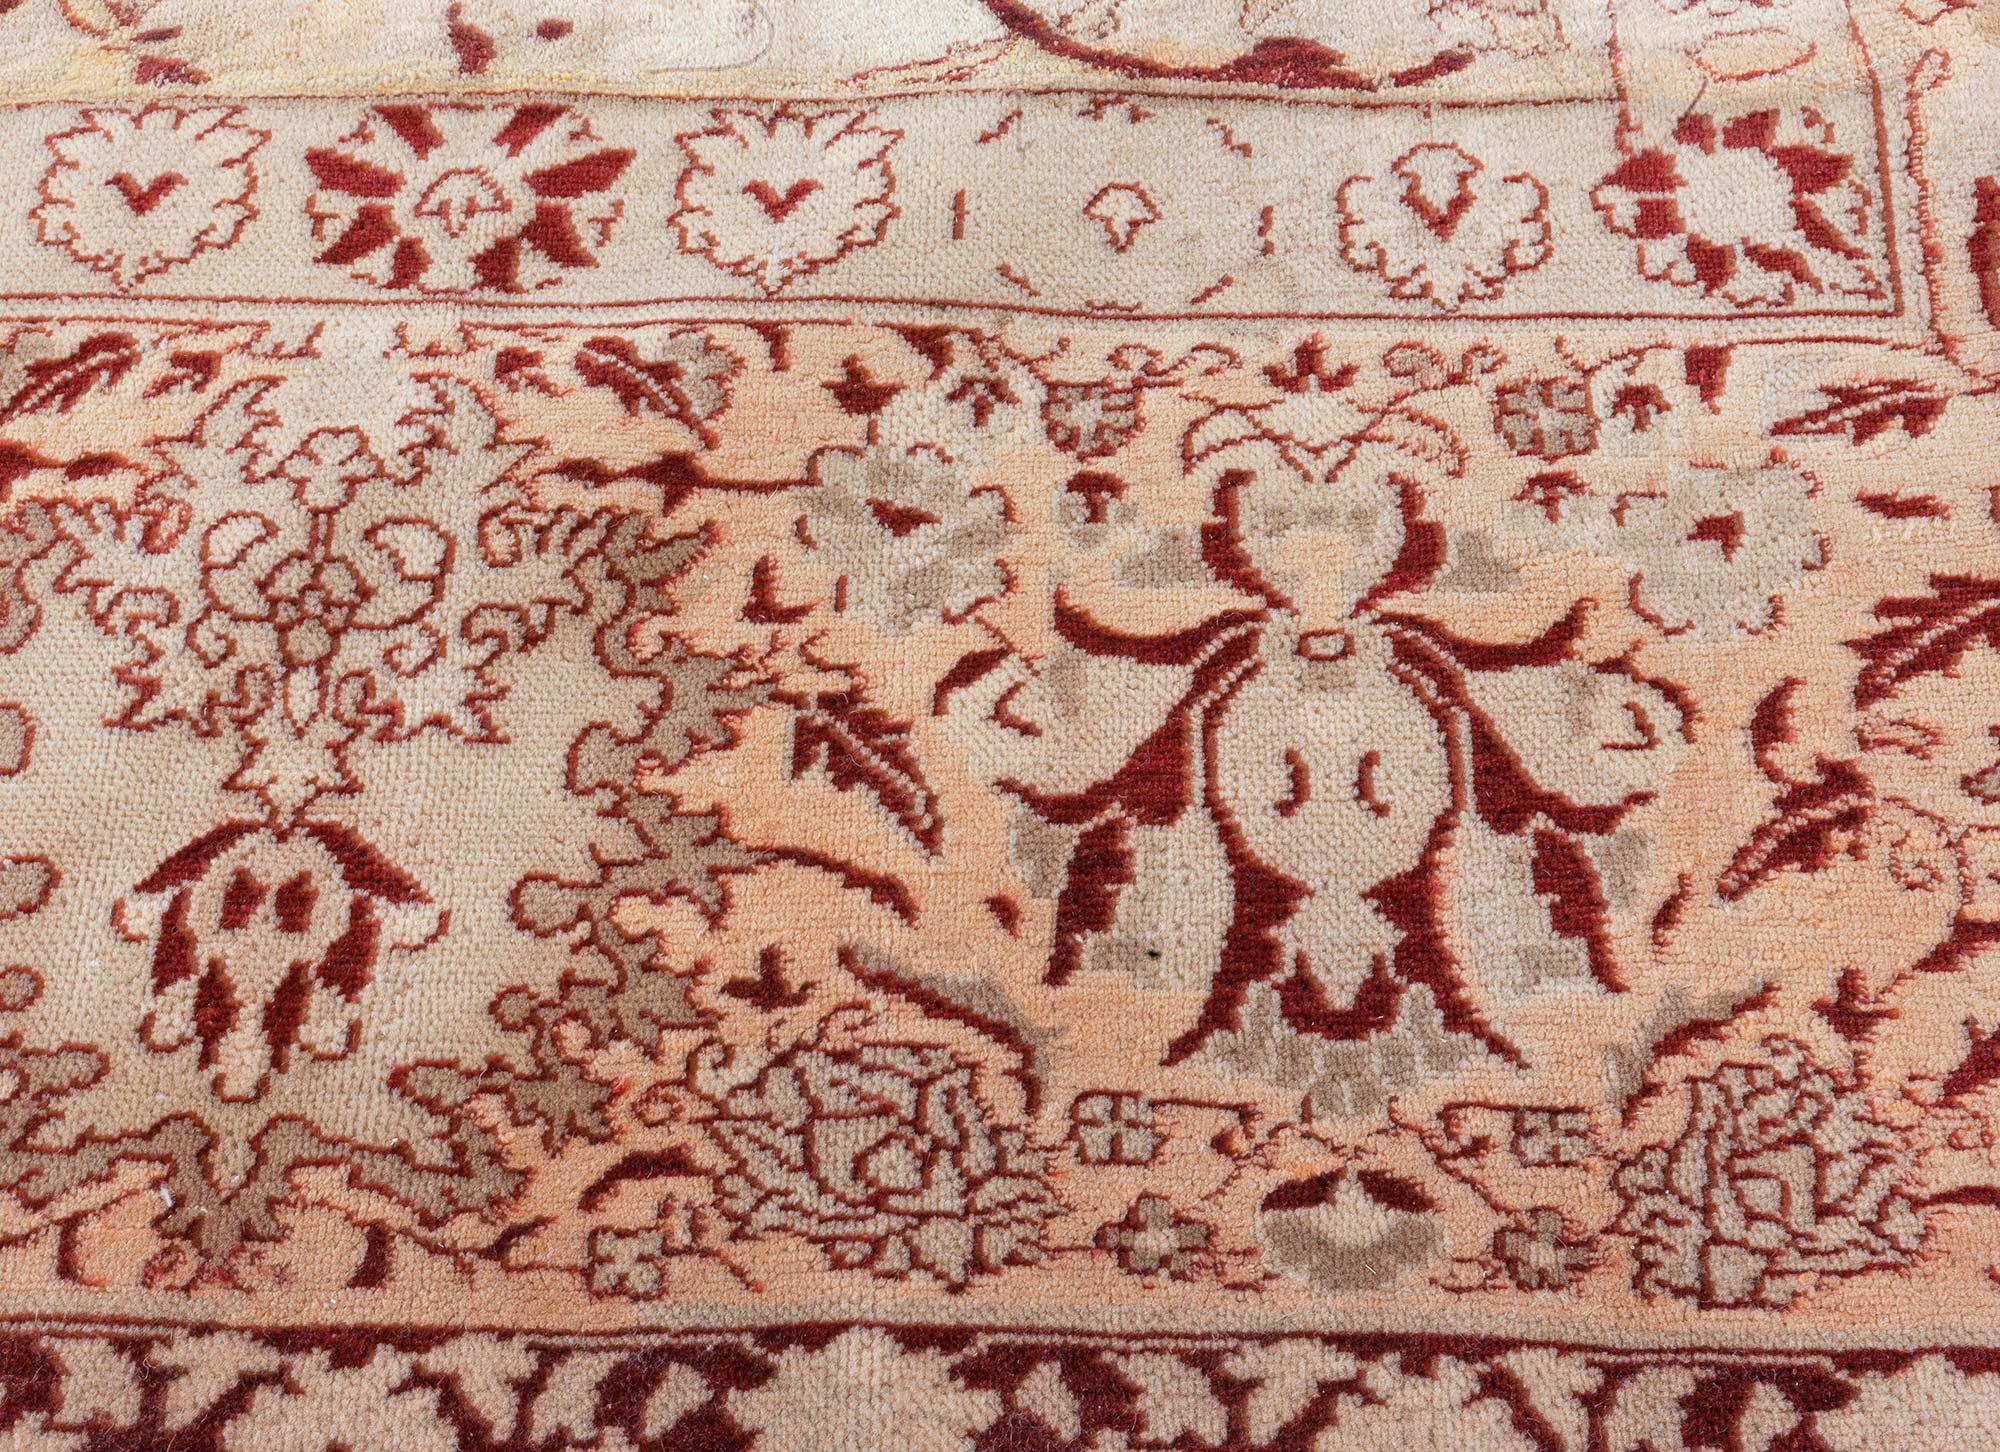 Antique Indian Amritsar Red and Beige Wool Carpet 2